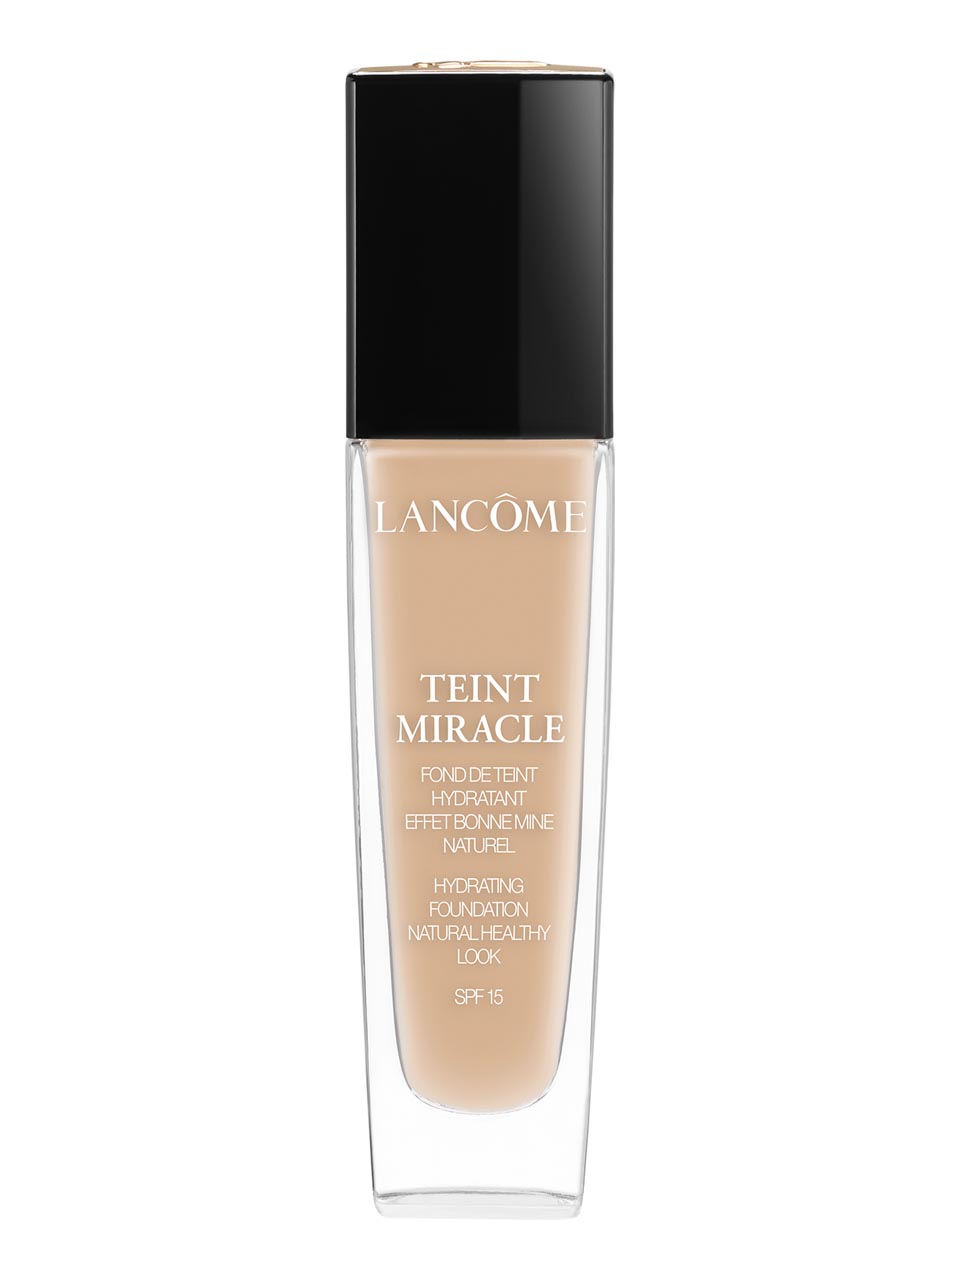 Lancôme Teint Miracle Radiant Foundation - BEIGE DORE 0035 null - onesize - 1